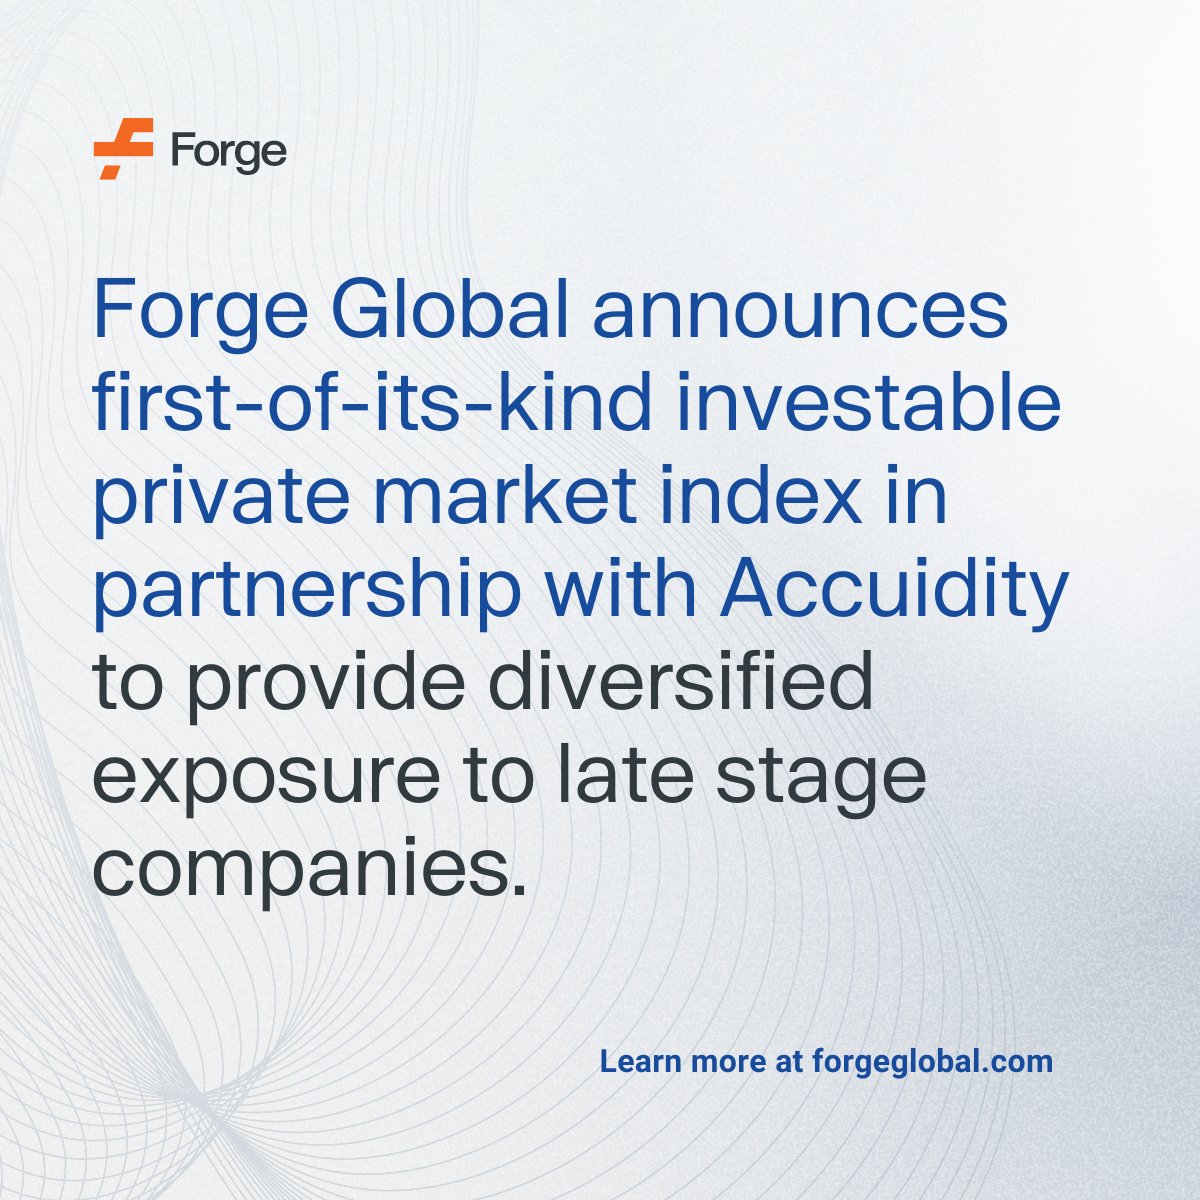 1/3 LATEST NEWS: Forge Global announces first-of-its-kind investable private market index in partnership with Accuidity to provide diversified exposure to late-stage companies.